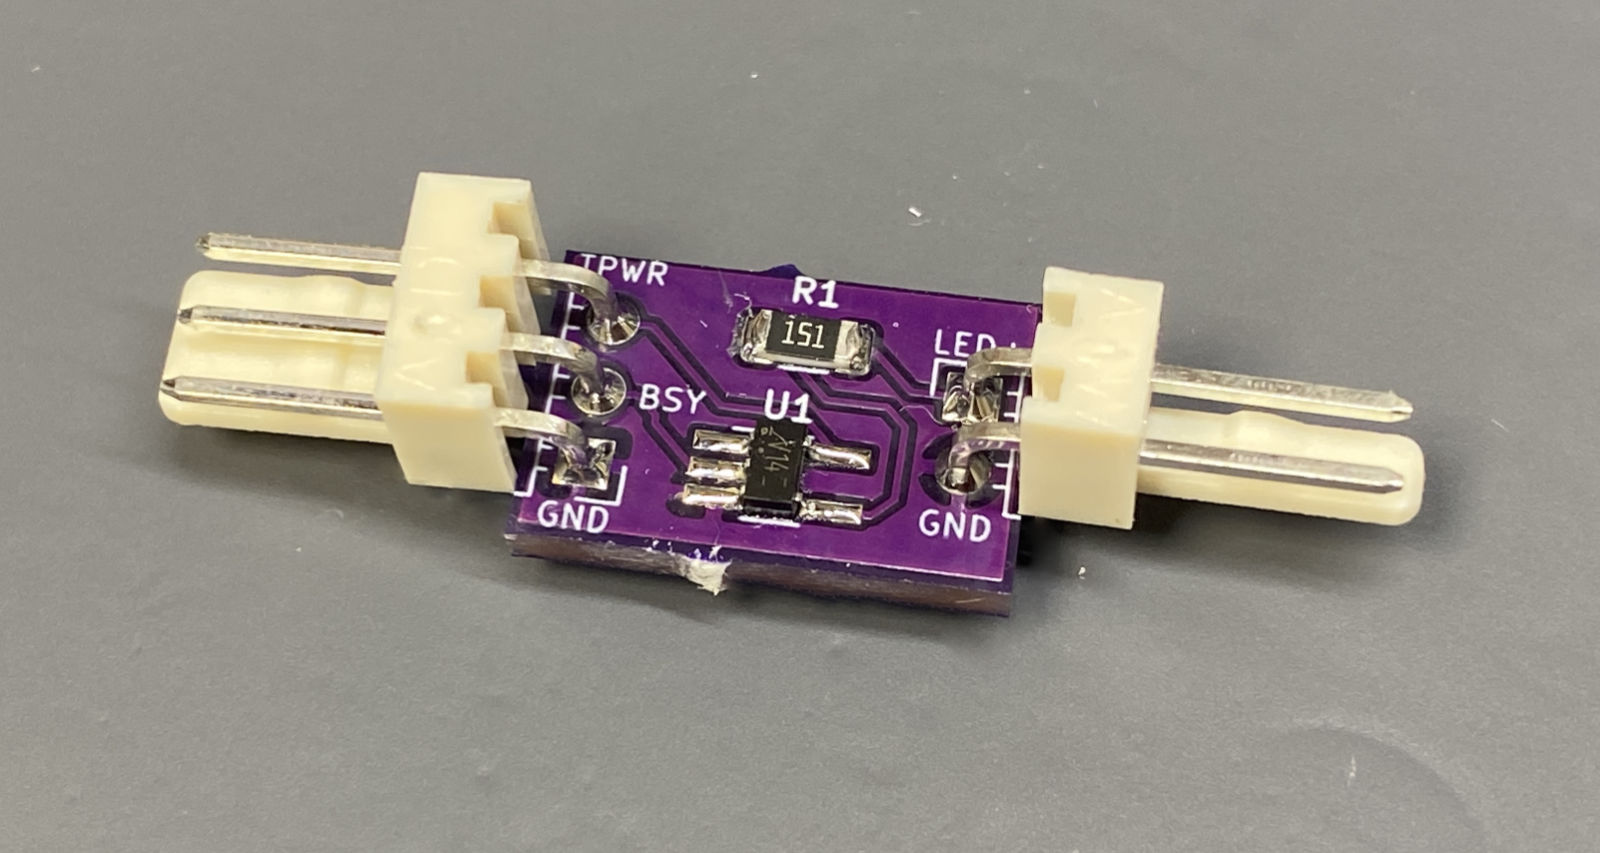 The activity LED adapter board